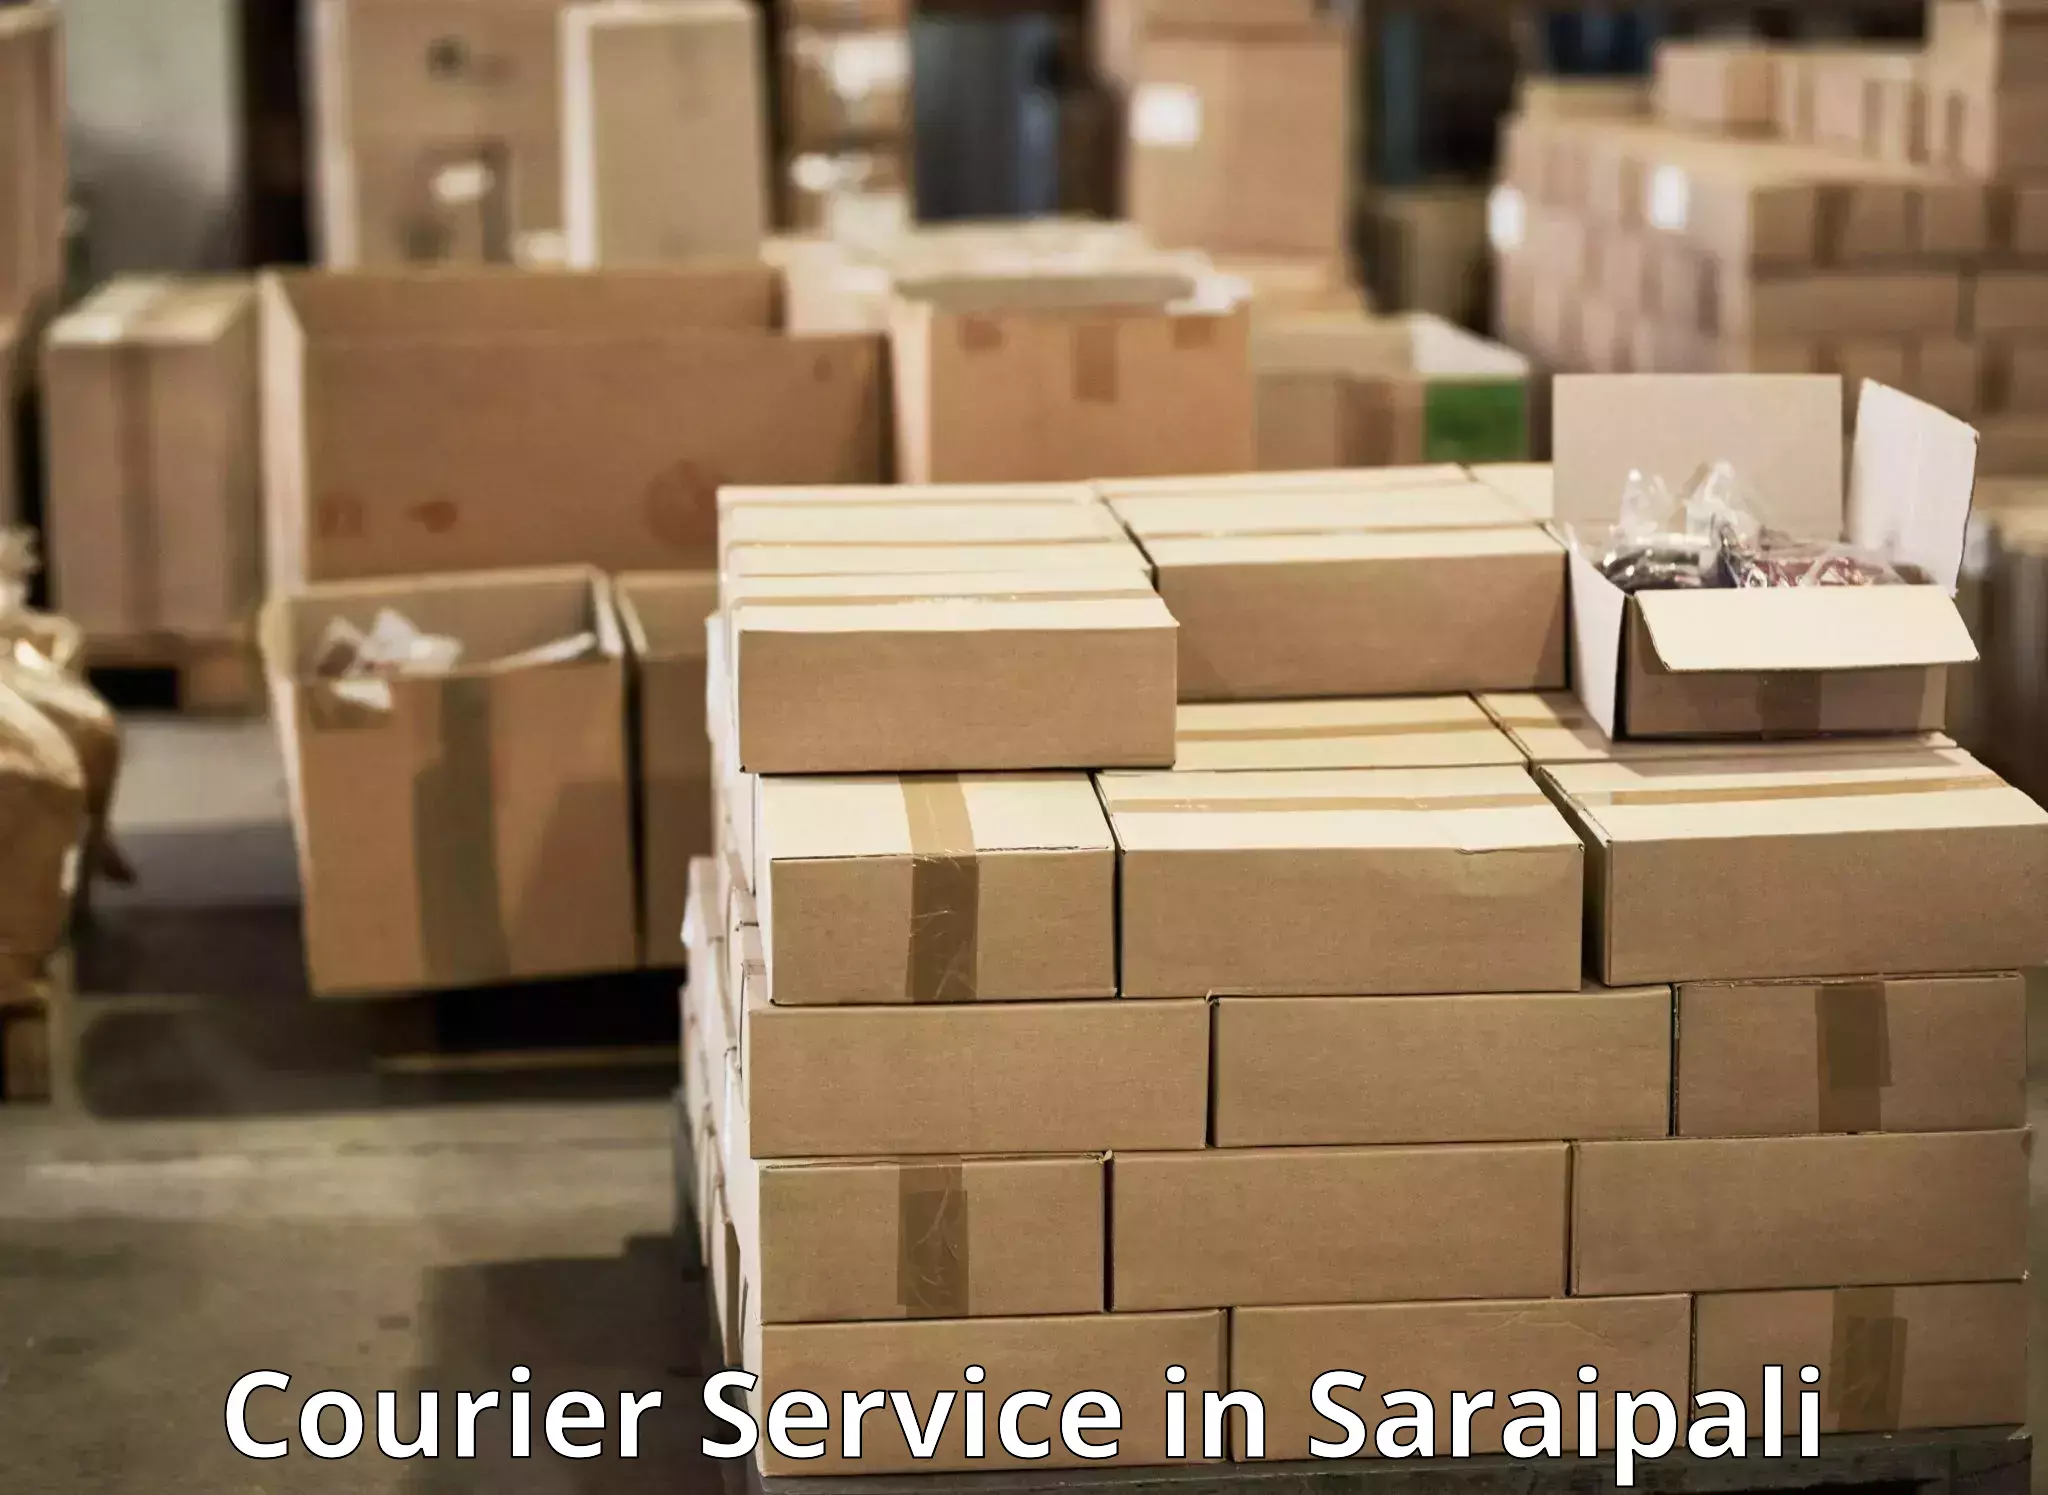 Customer-friendly courier services in Saraipali